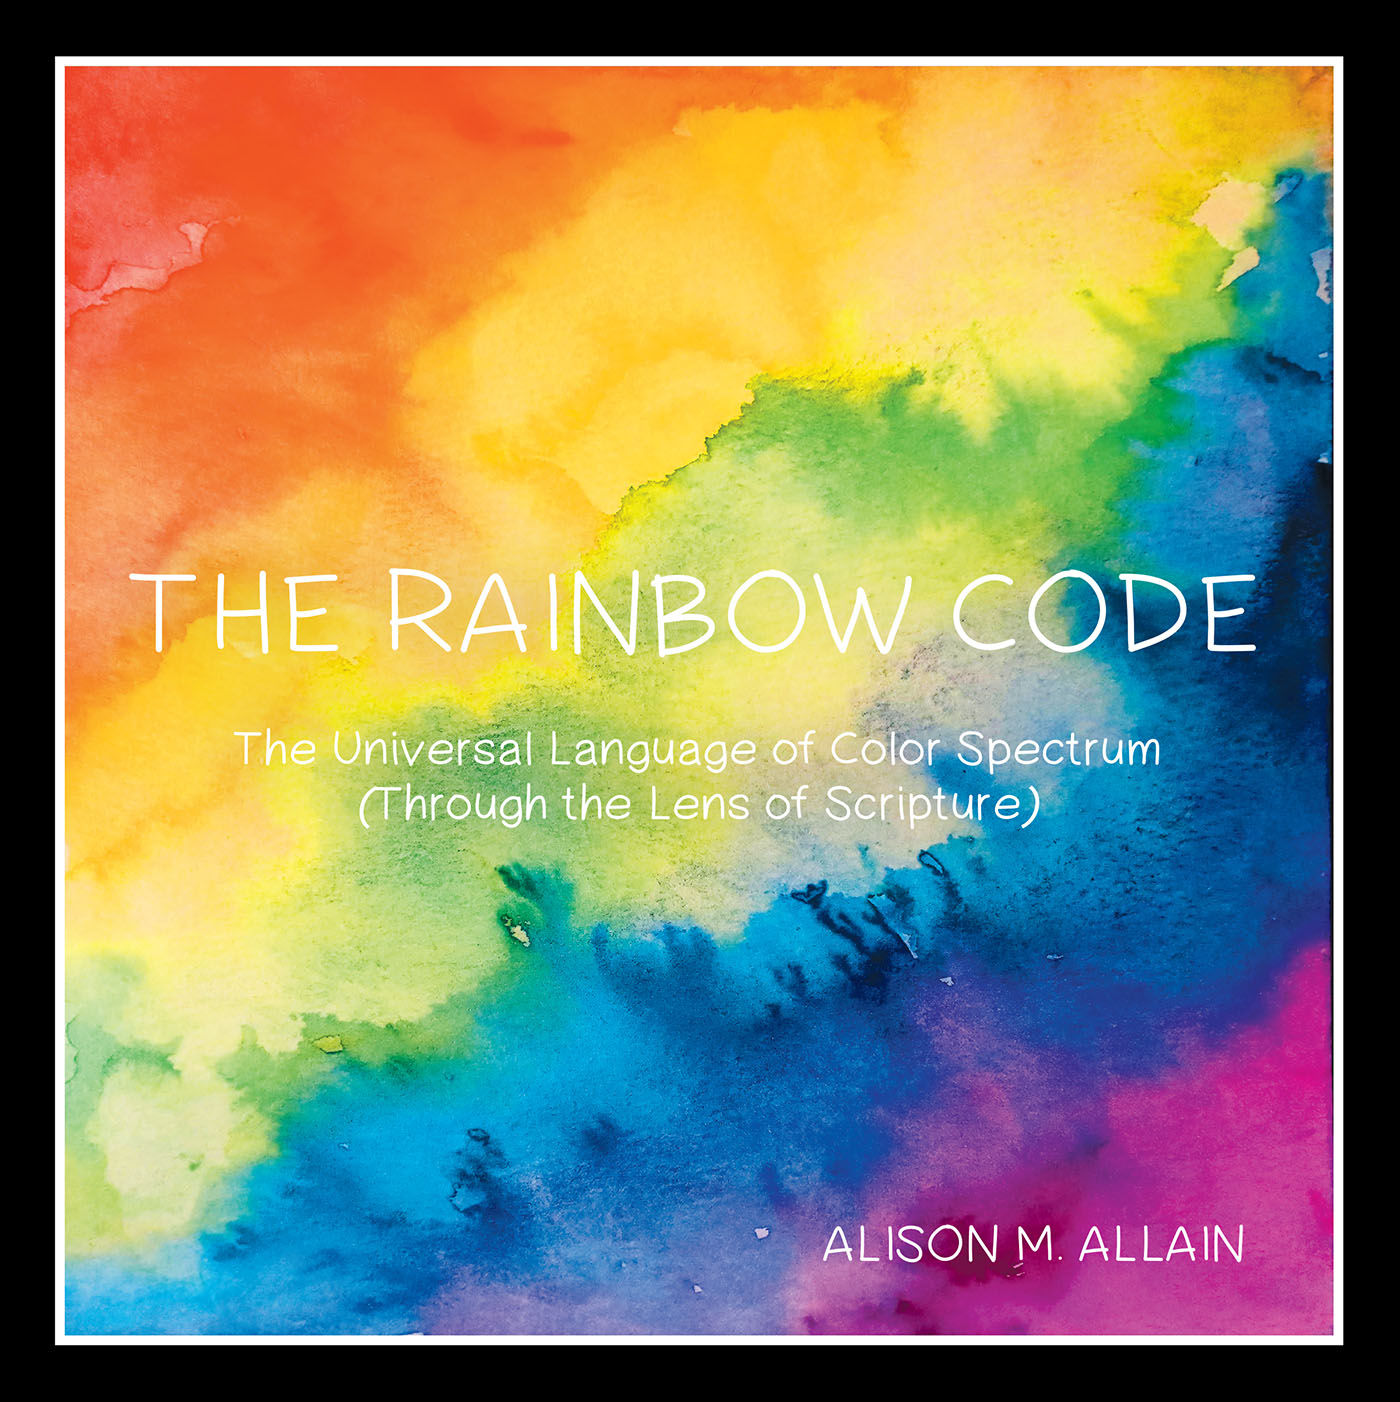 Alison M. Allain’s New Book, "The Rainbow Code," is an Insightful Deep Dive Into the Color Spectrum and the Meaning of Colors as Interpreted Through God’s Teachings